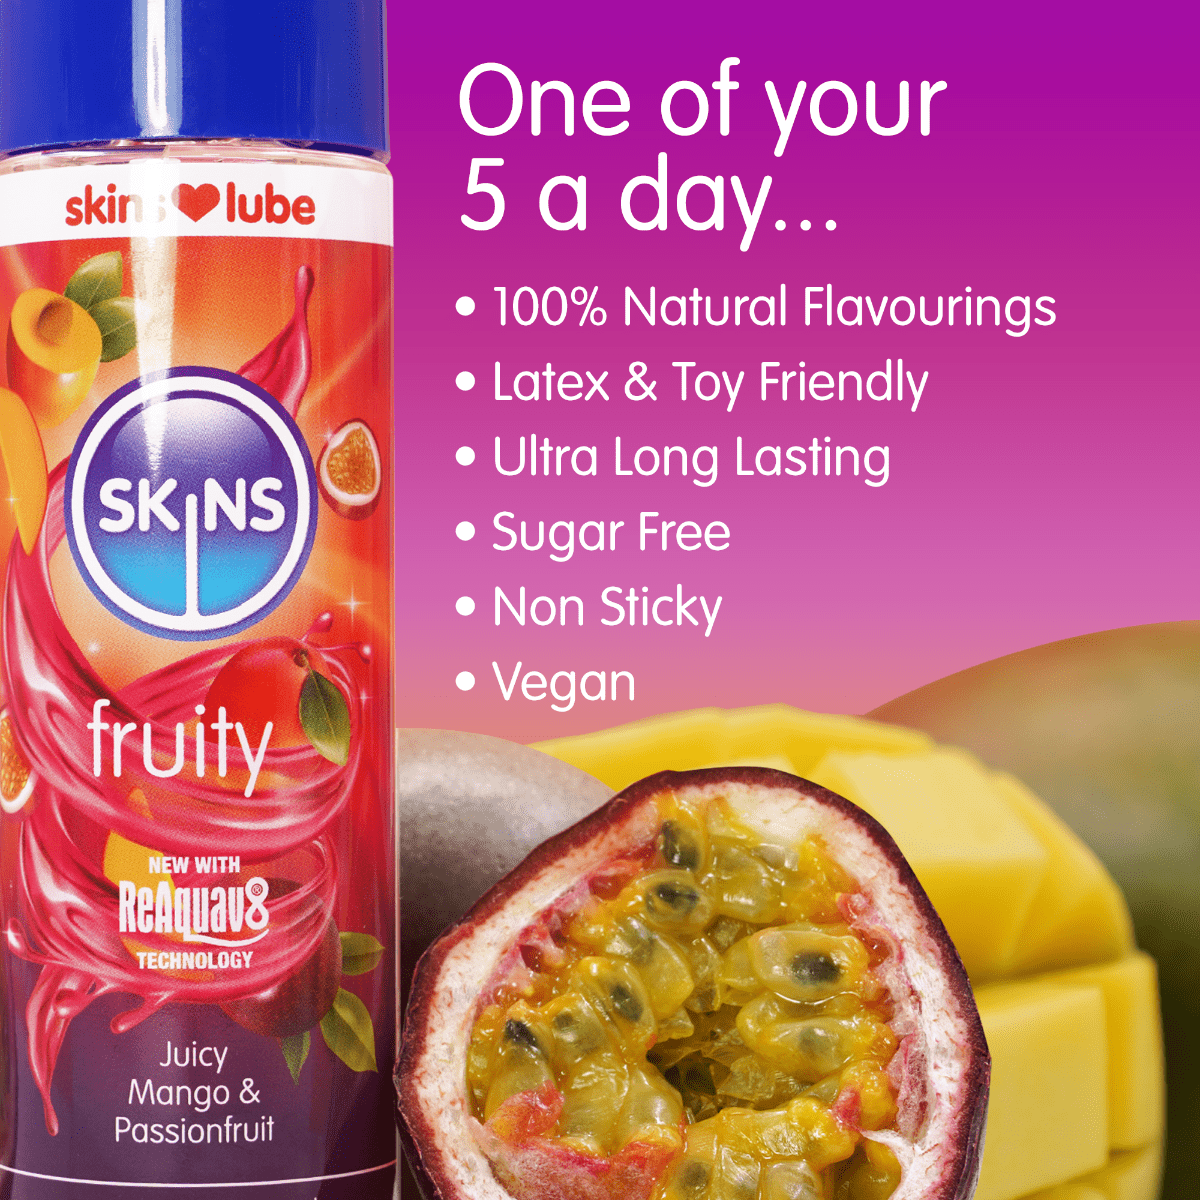 Skins mango and passionfruit lube